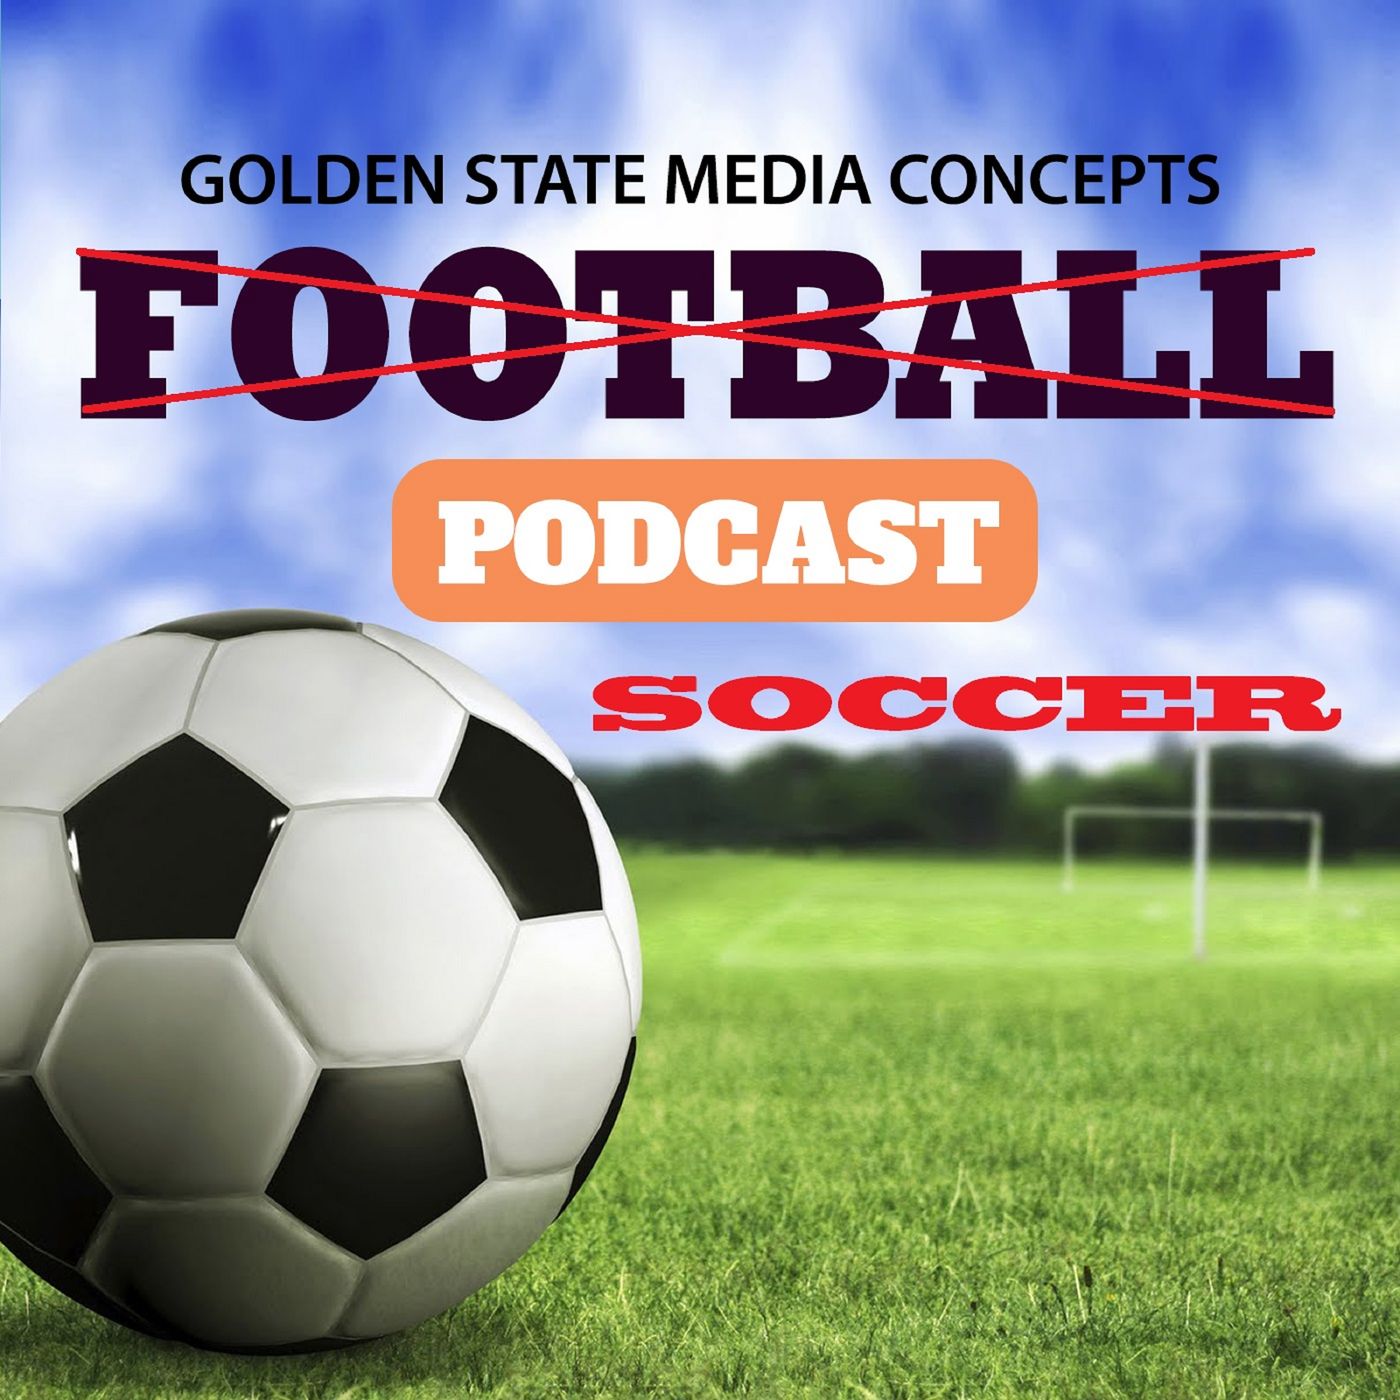 Atalanta's Triumph: Europa League Glory & Managerial Musings | The GSMC Soccer Podcast by GSMC Sports